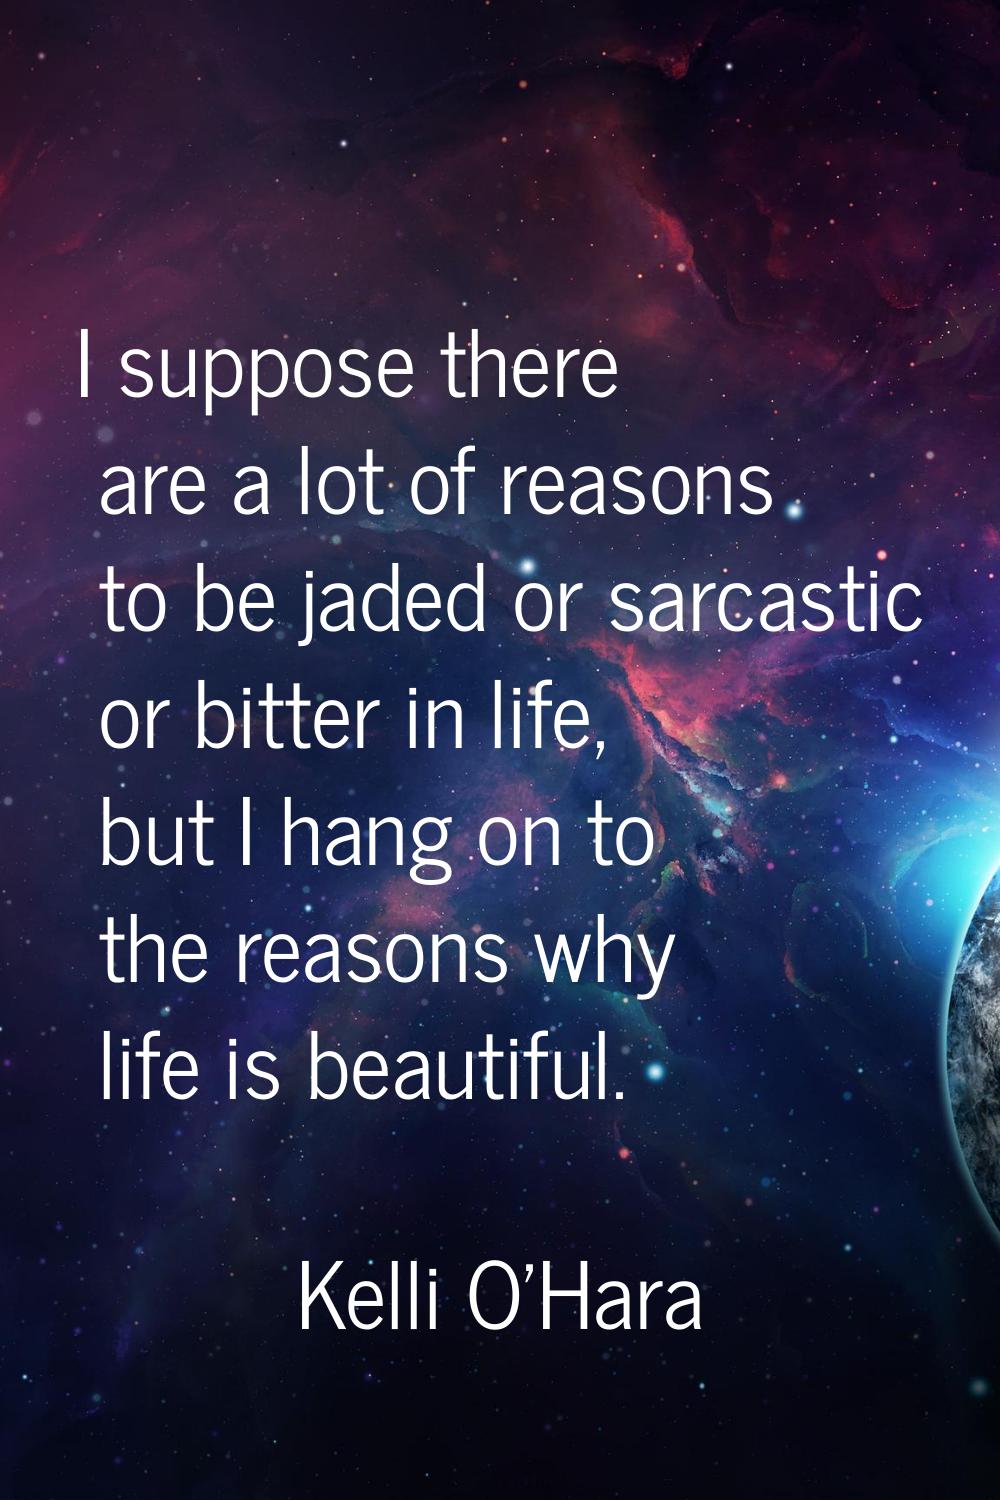 I suppose there are a lot of reasons to be jaded or sarcastic or bitter in life, but I hang on to t